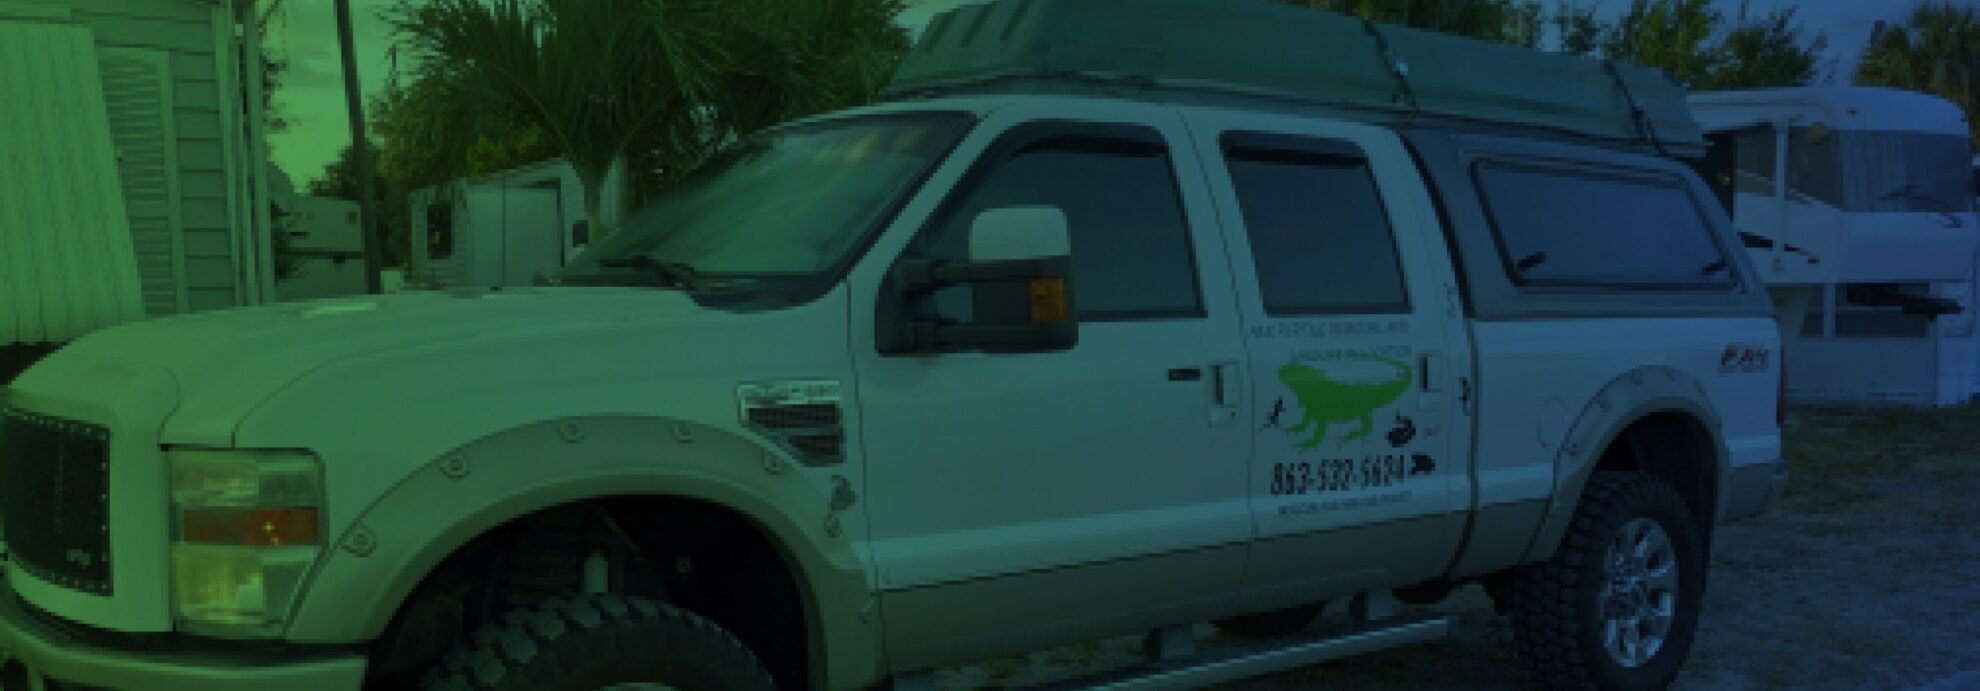 AB Reptile Removal and Wildlife Relocation truck okeechobee fl